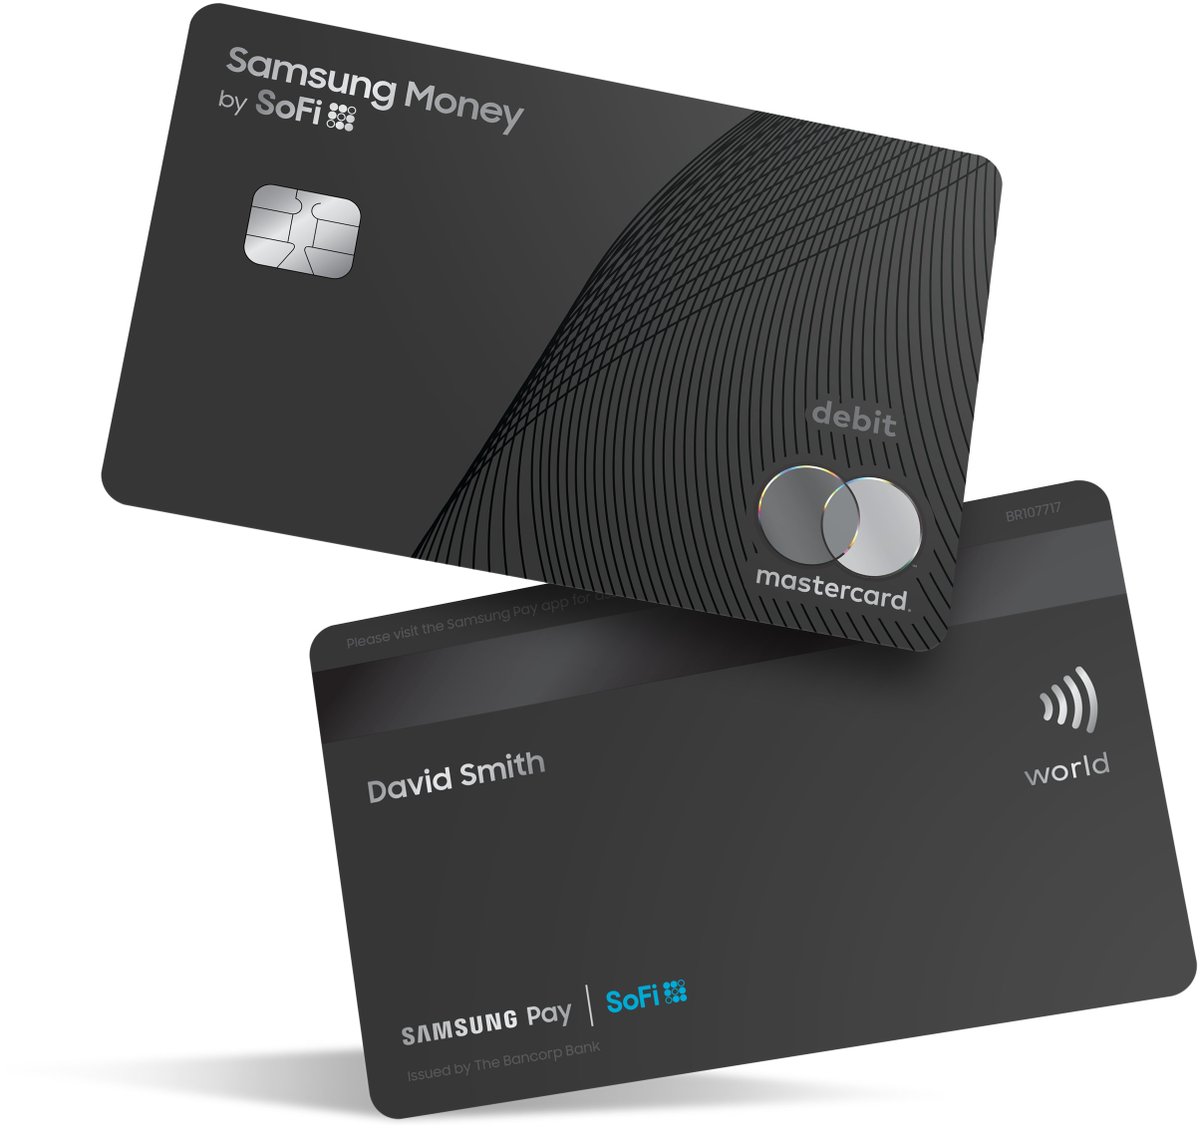 3)  @SoFi is a disruptor to the traditional way of banking. It's large suite of online services include:- Banking-  @Samsung Money by SoFi- Credit Card w/  @Mastercard- Investing- Crypto w/  @coinbase - Loan ServiceThese services all have been rolled out since Jan 2019